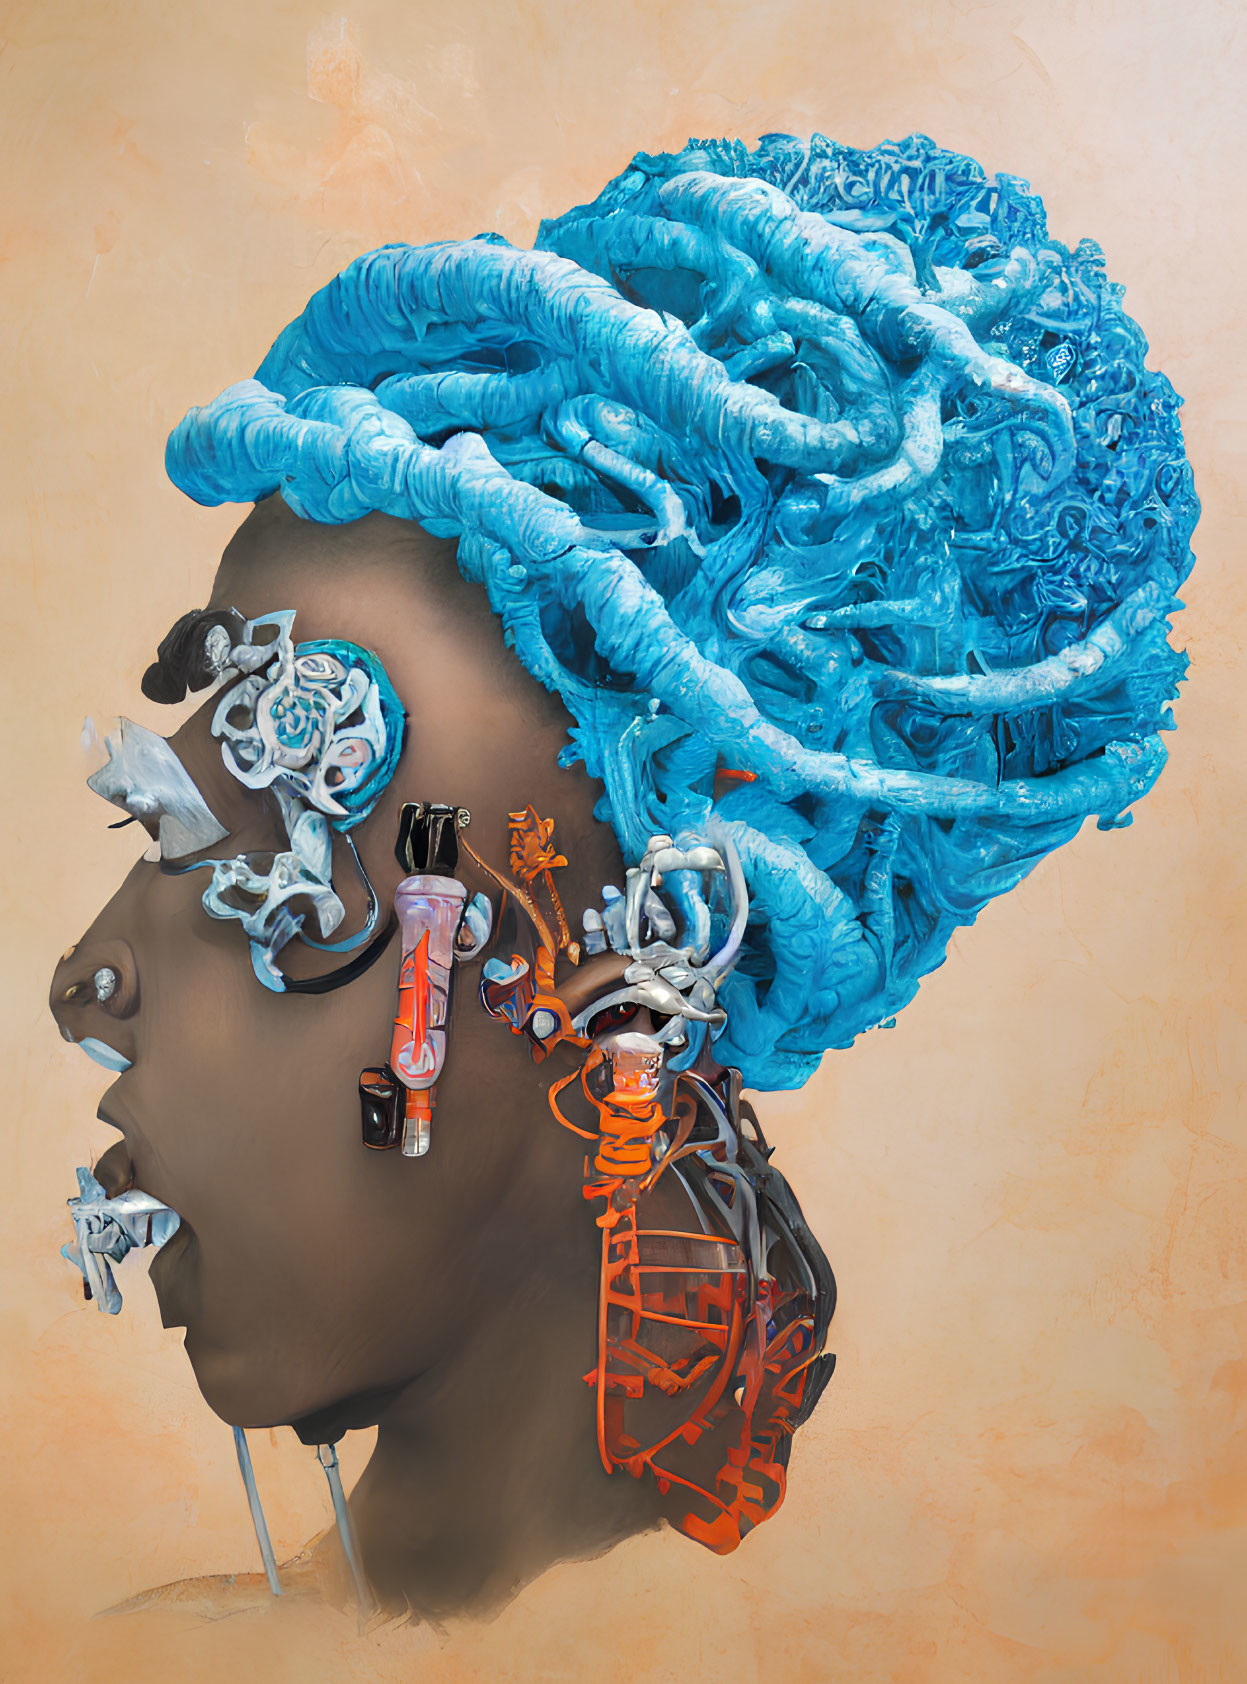 Surreal artwork: Profile of individual with detailed blue brain-like structure